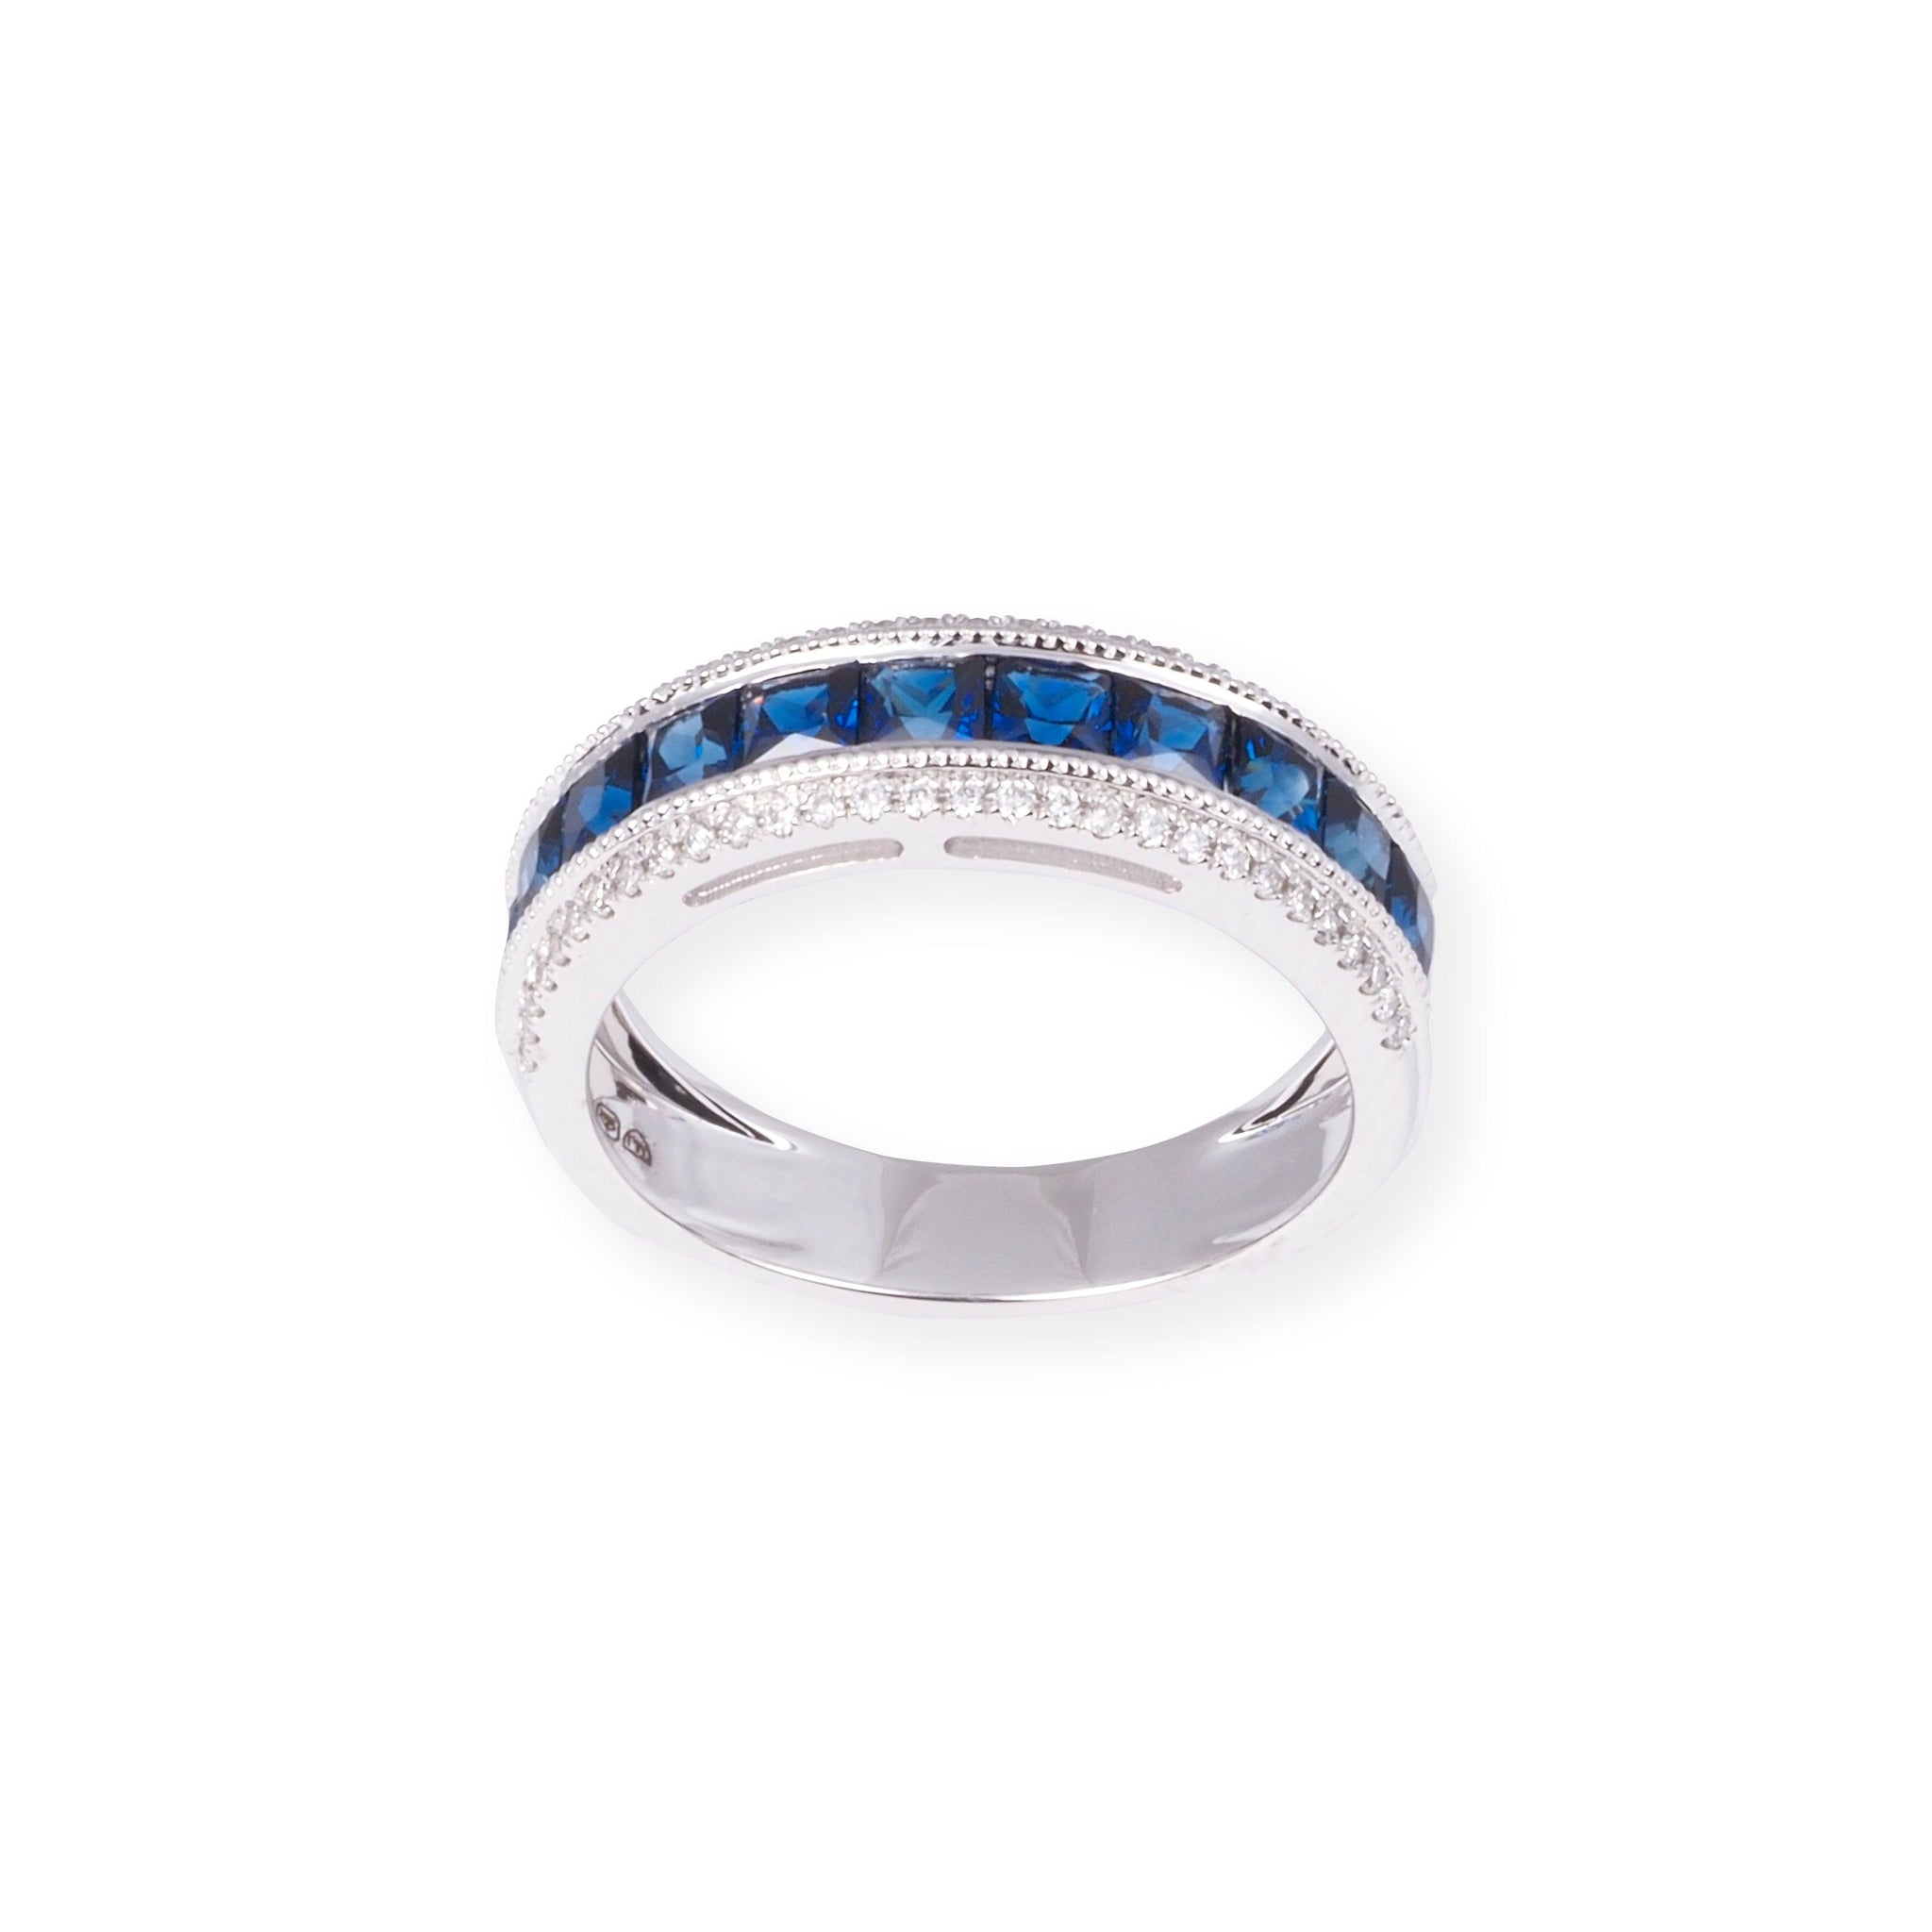 18ct White Gold With Diamonds & Blue Sapphire Ring In Pave Setting LR-7040